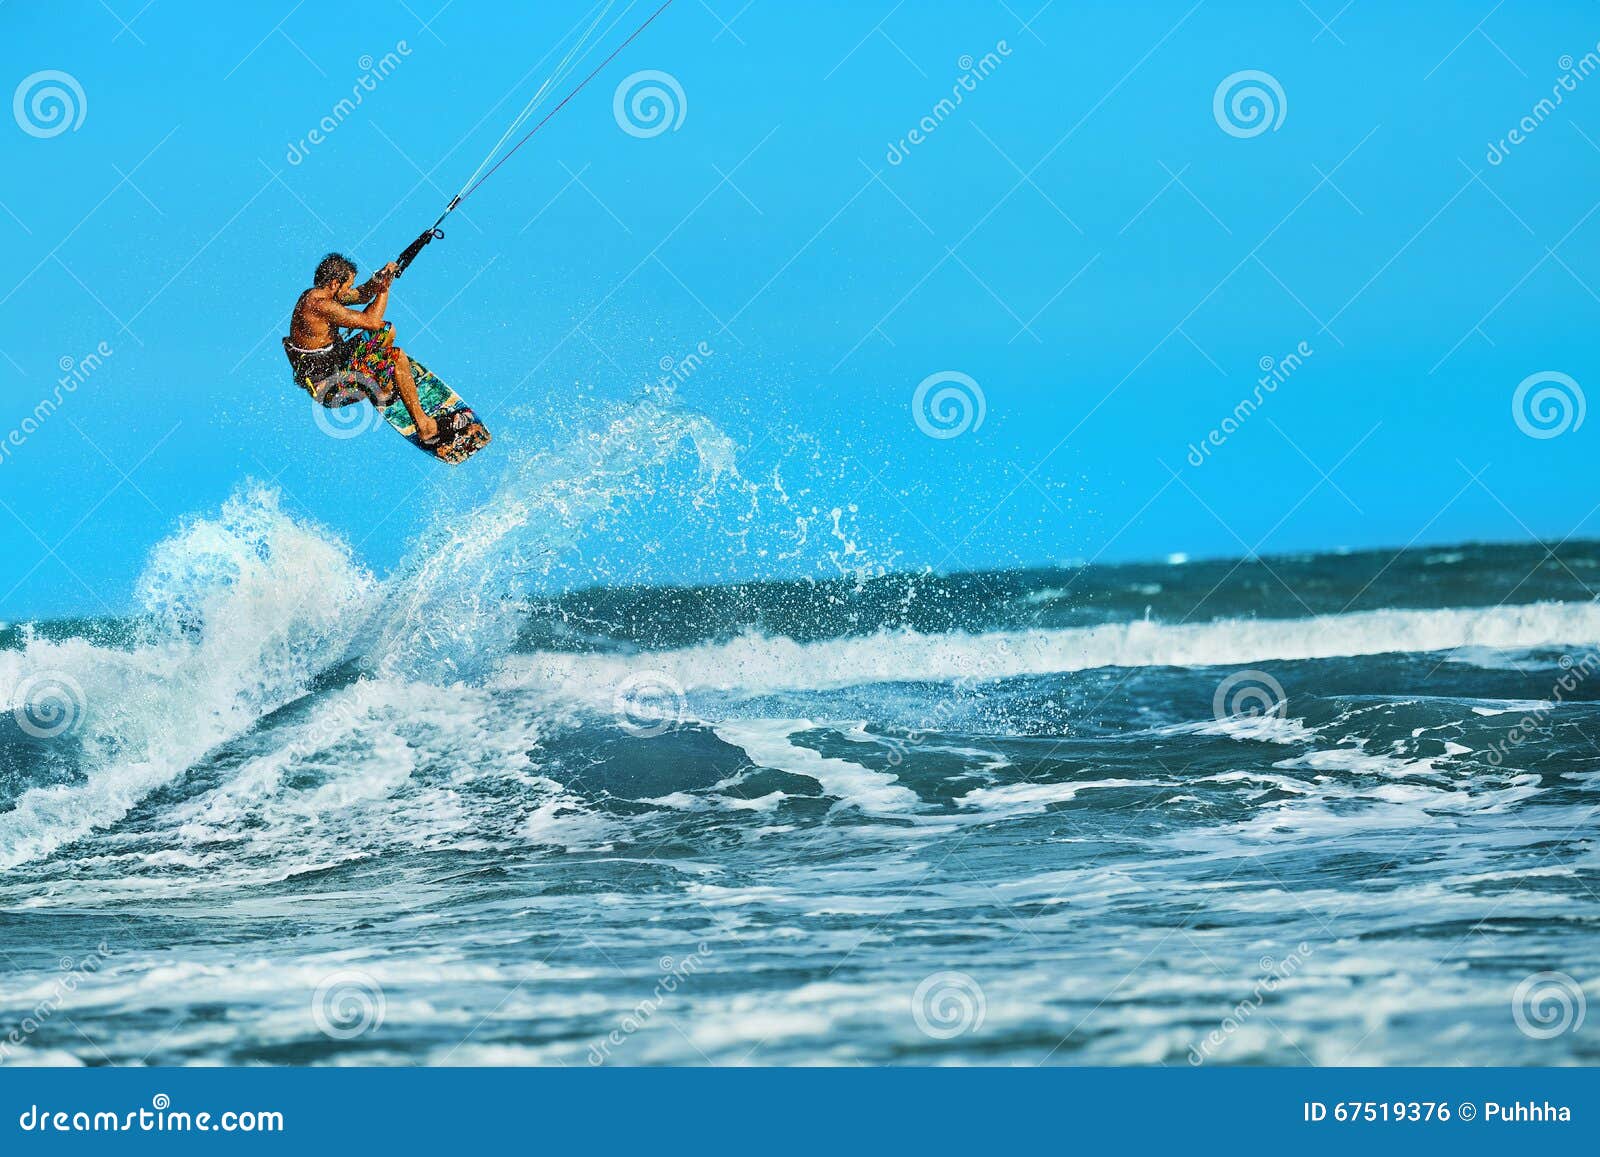 recreational water sports action. kiteboarding extreme sport. summer fun. hobby